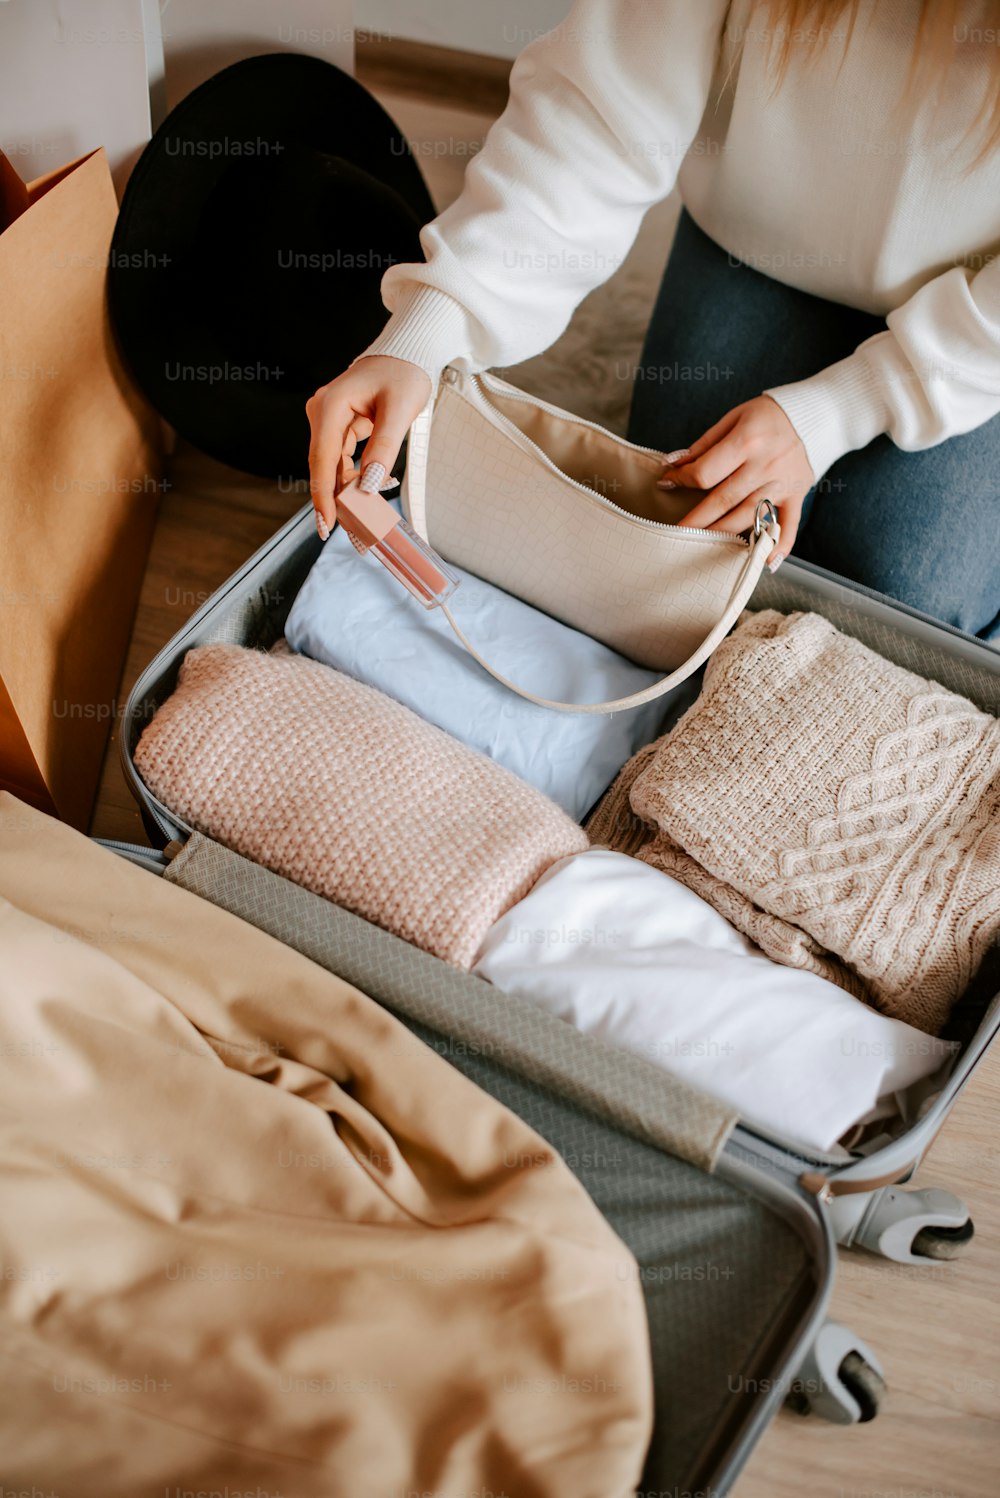 Packing Bags Pictures  Download Free Images on Unsplash